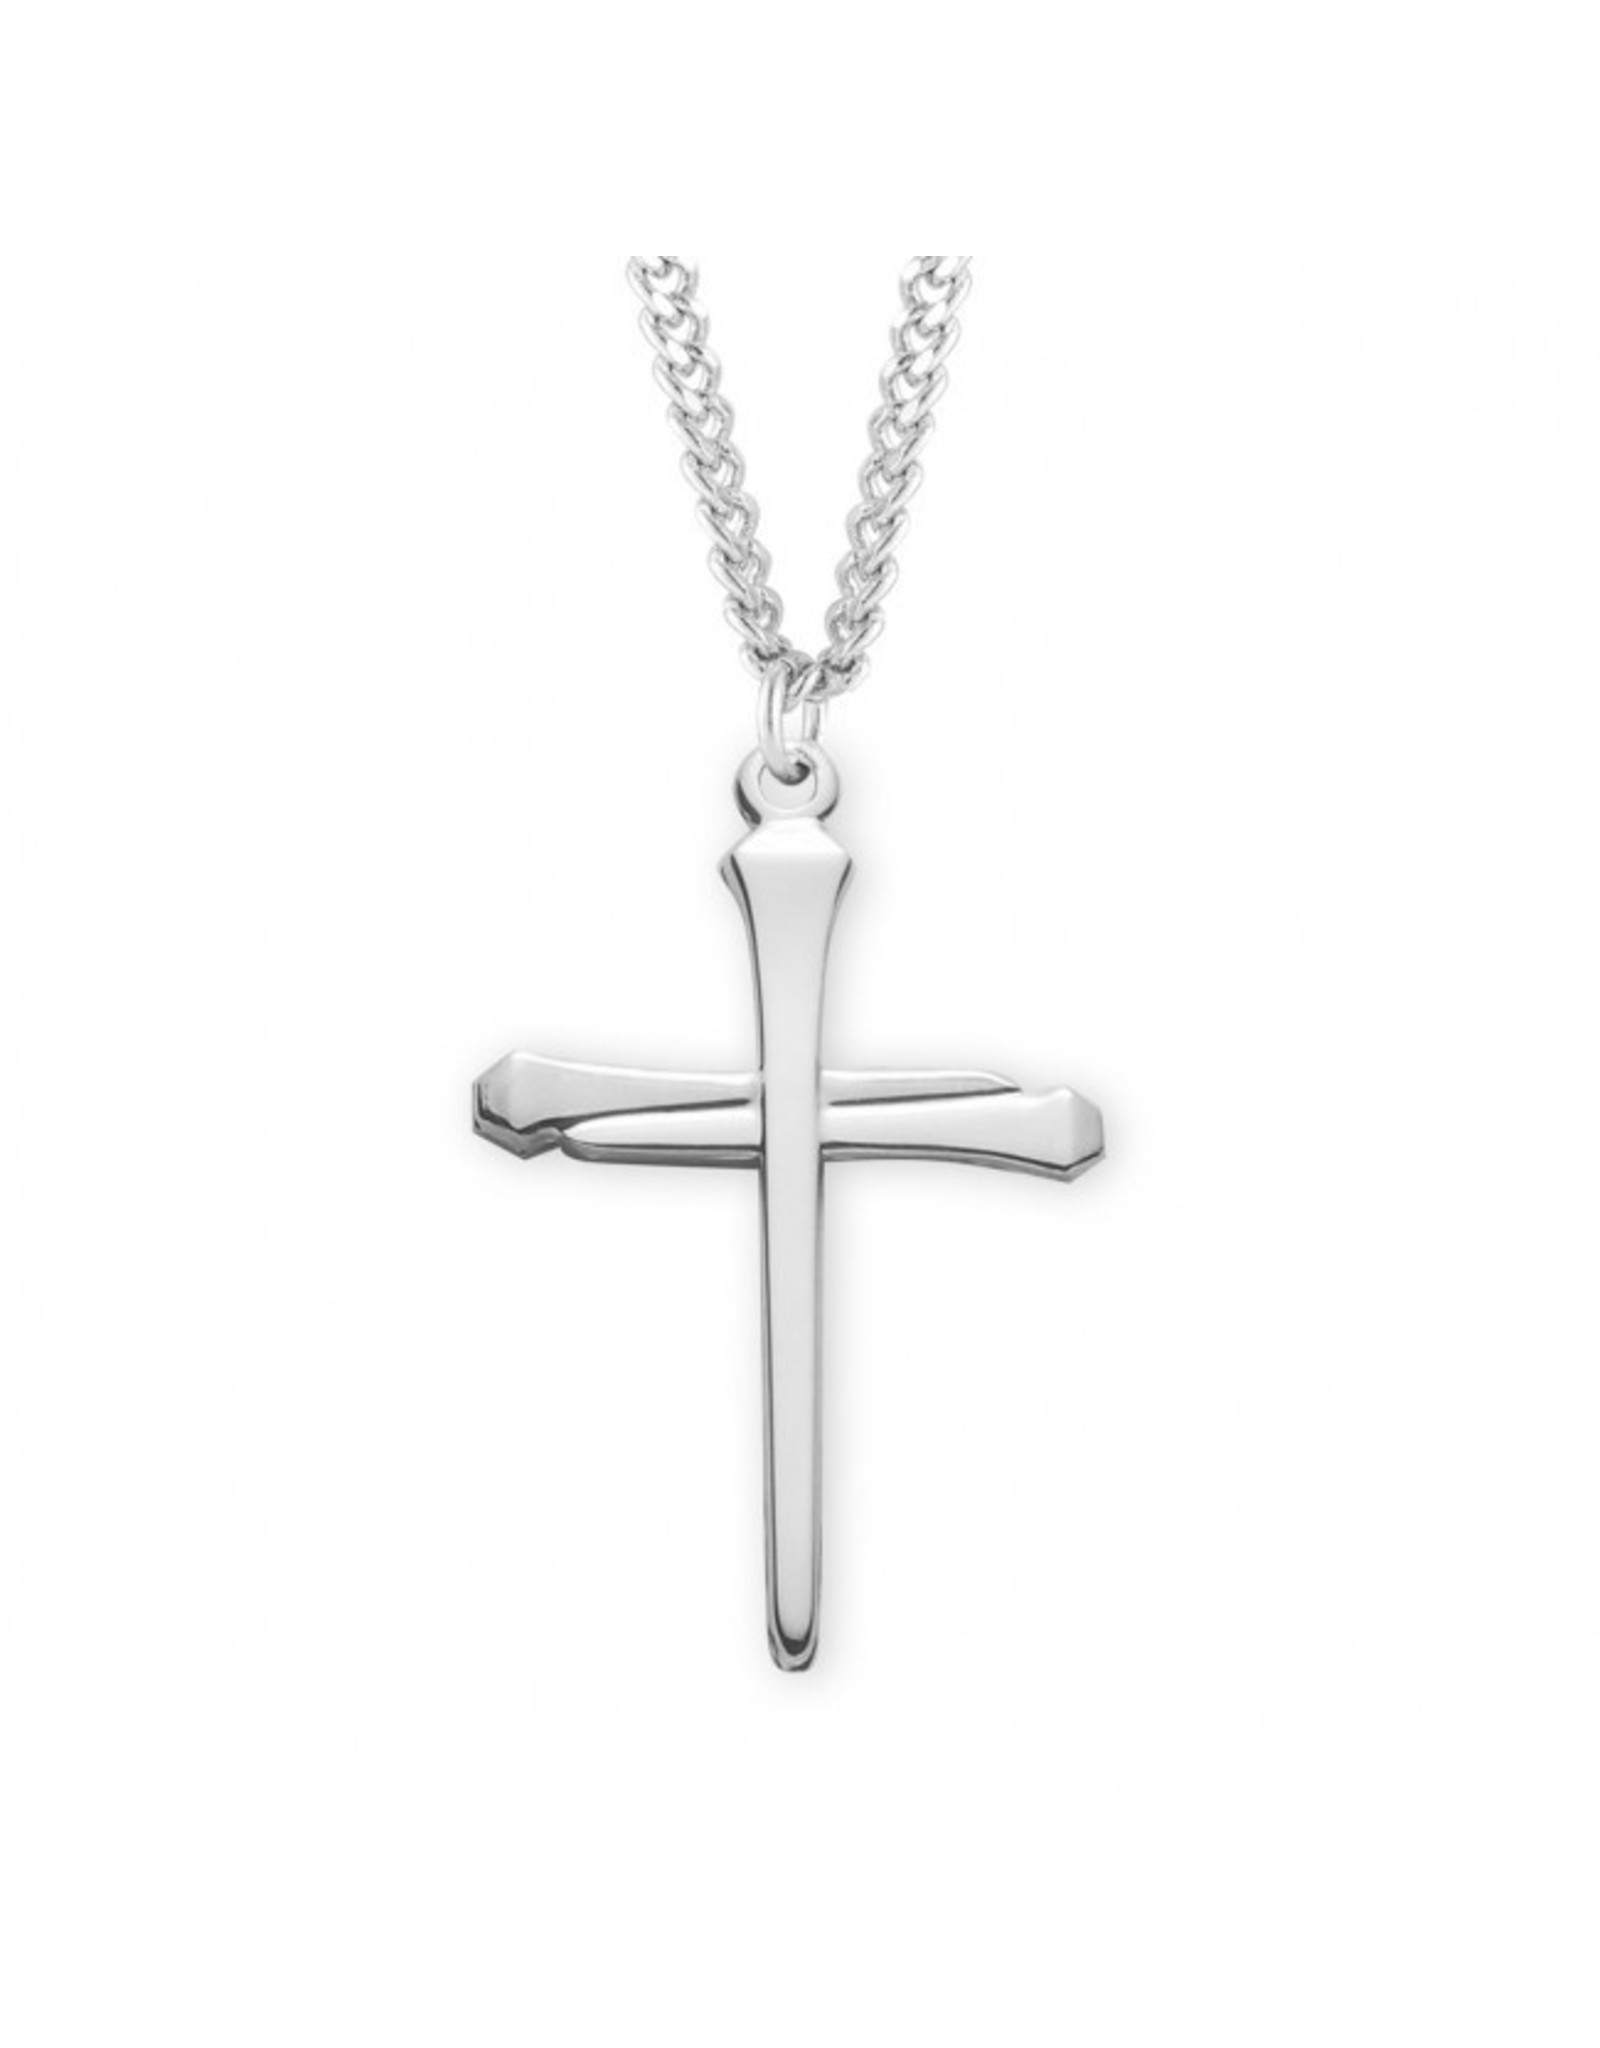 HMH Cross Nail Medal, Sterling Silver, 24" Chain